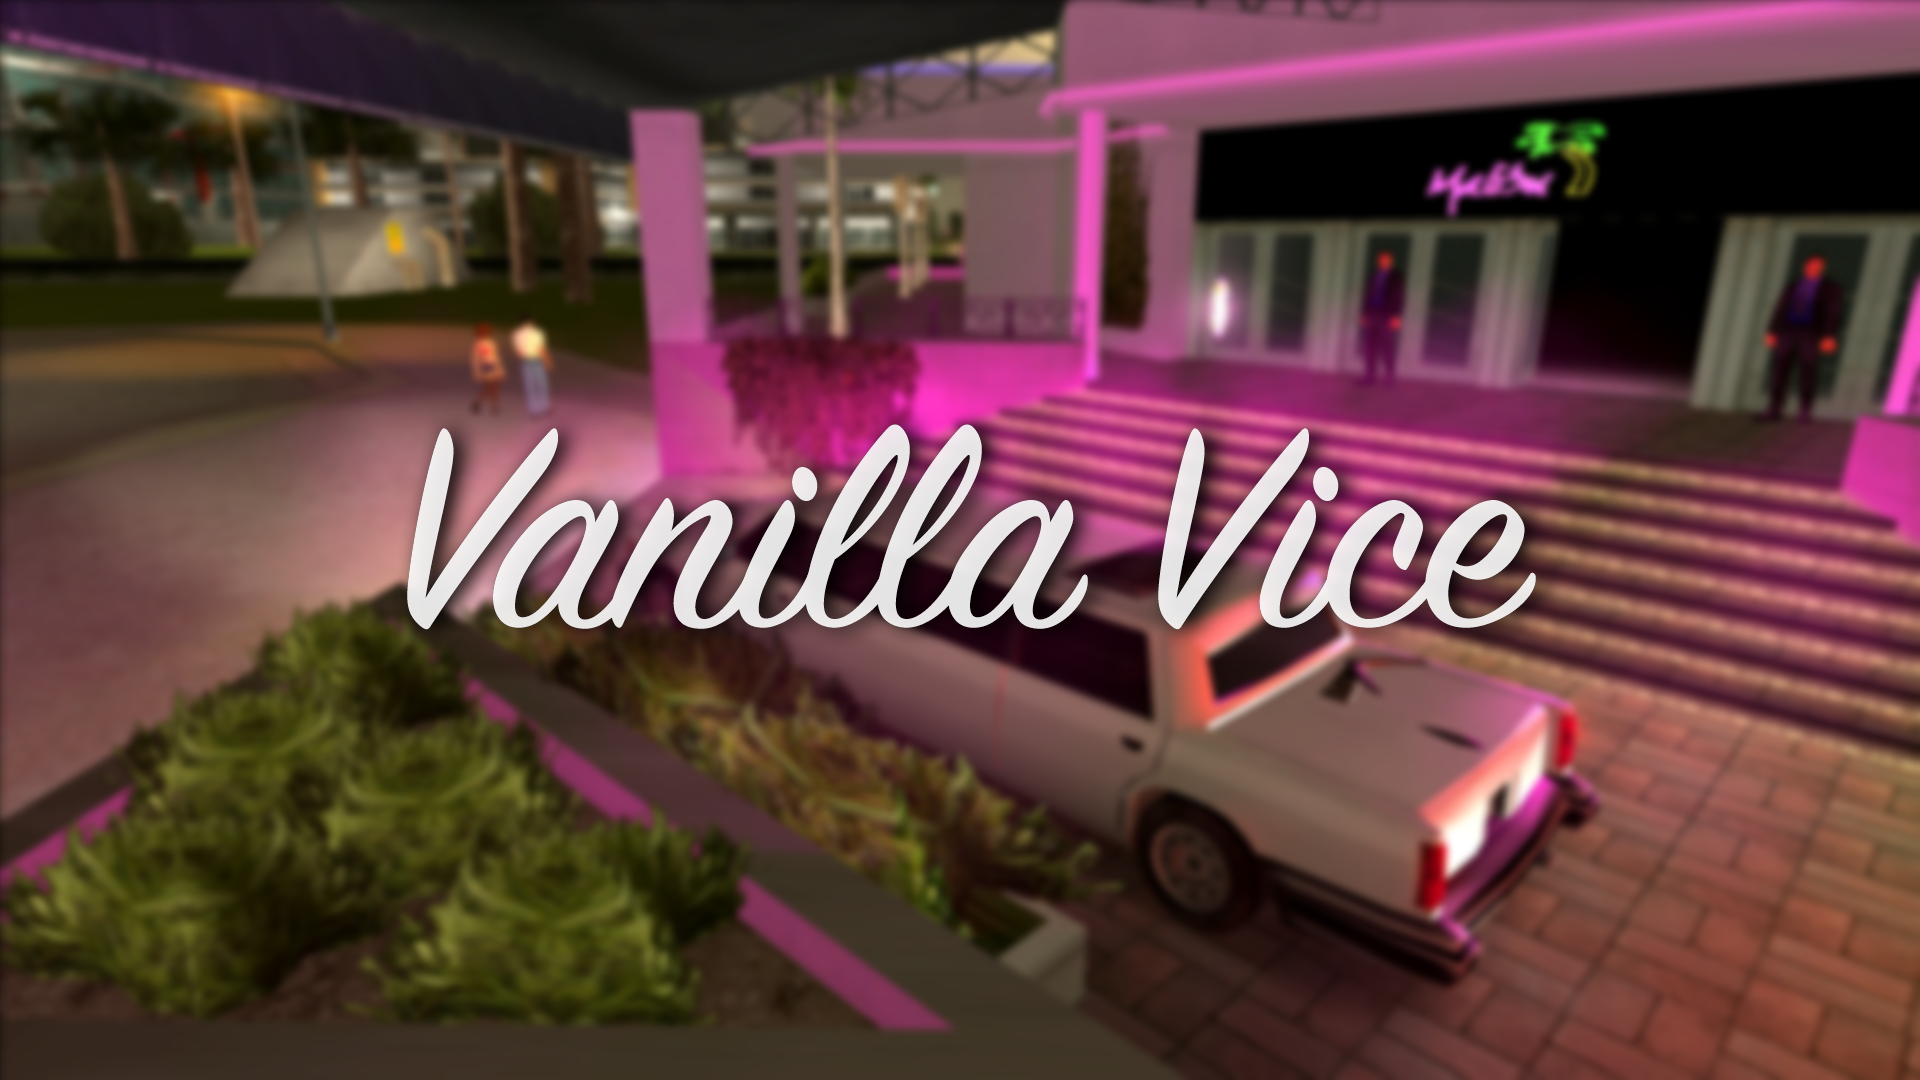 5 GTA Vice City features that stand the test of time